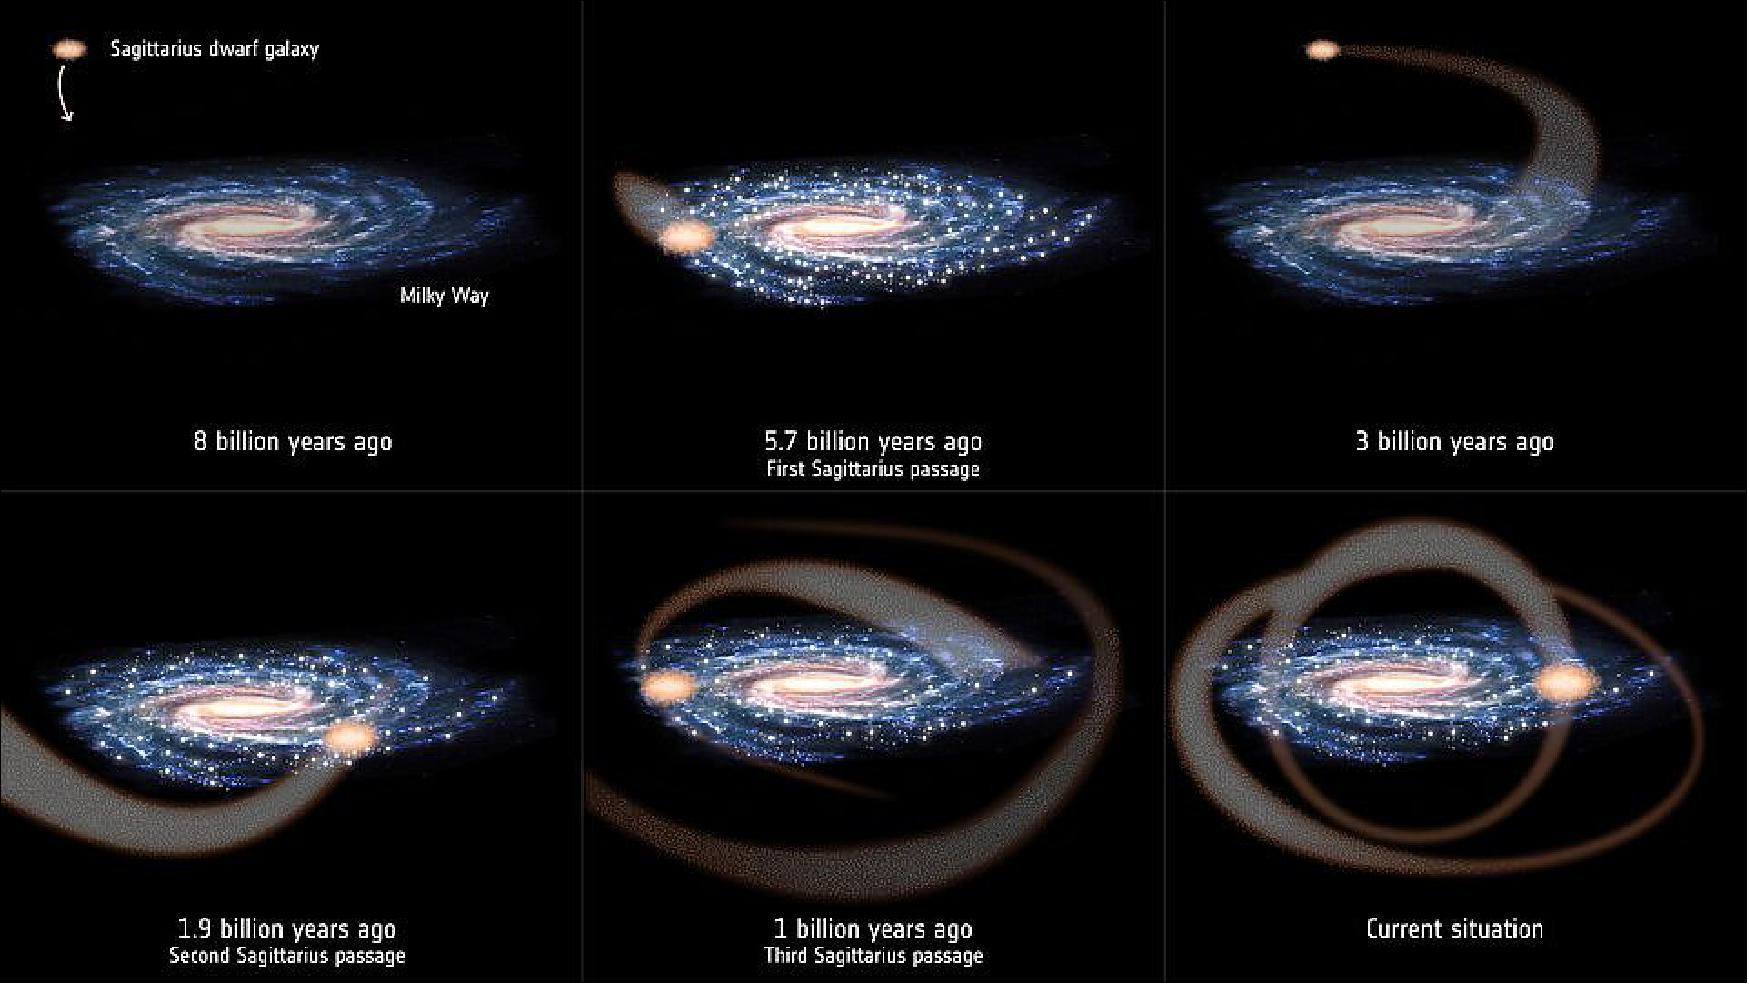 Figure 66: Sagittarius collisions trigger star formation in Milky Way. The Sagittarius dwarf galaxy has been orbiting the Milky Way for billions for years. As its orbit around the 10 000 more massive Milky Way gradually tightened, it started colliding with our galaxy's disc. The three known collisions between Sagittarius and the Milky Way have, according to a new study, triggered major star formation episodes, one of which may have given rise to the Solar System (image credit: ESA)